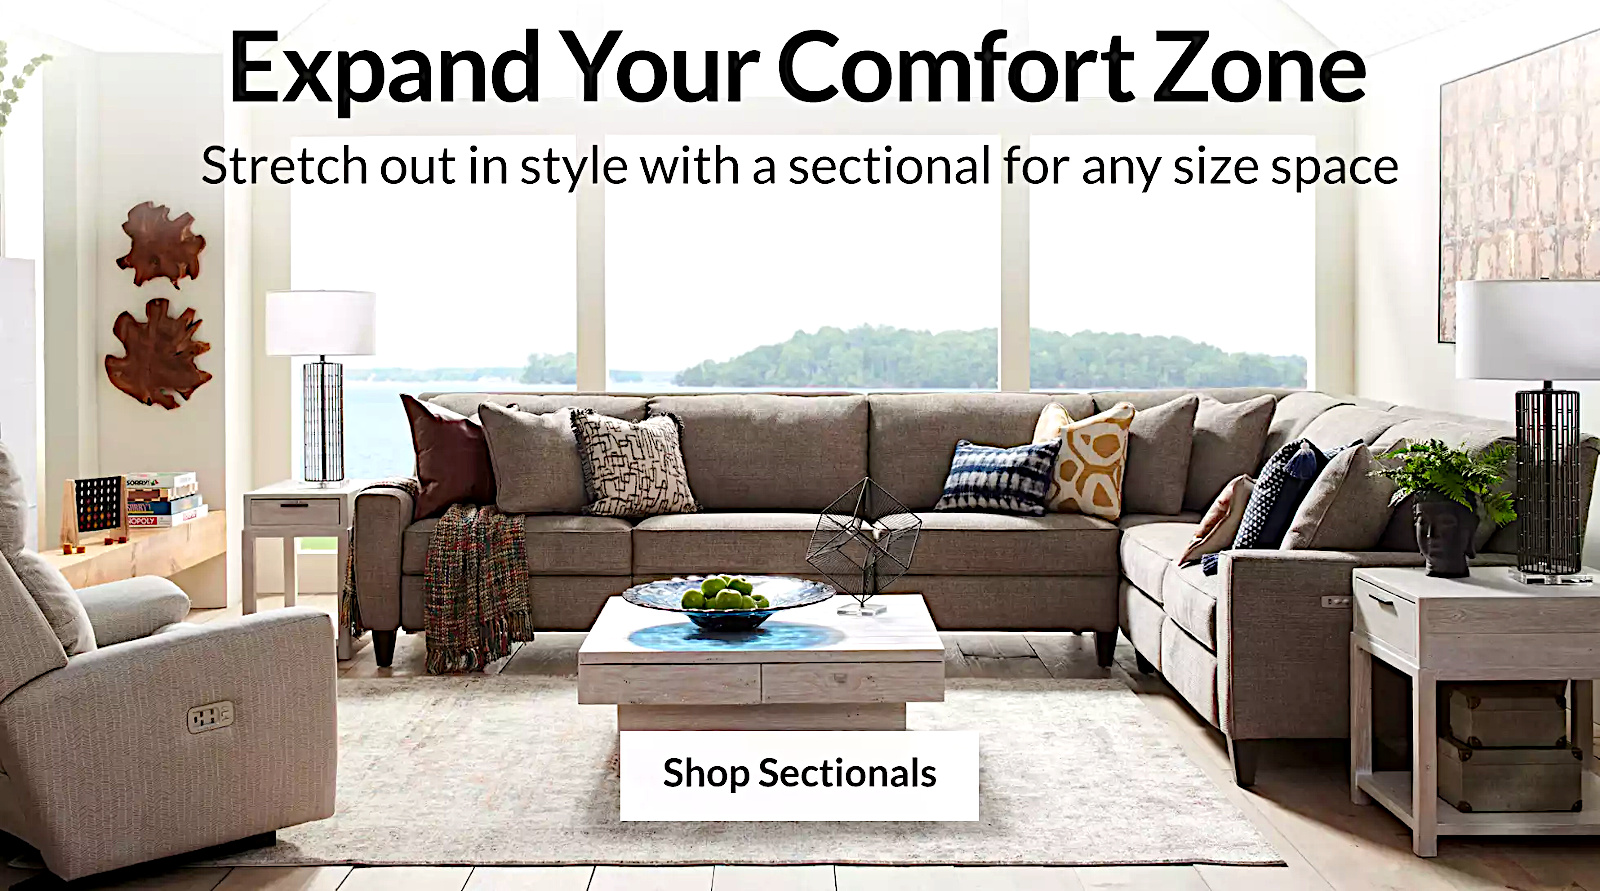 Expand your comfort zone economical price